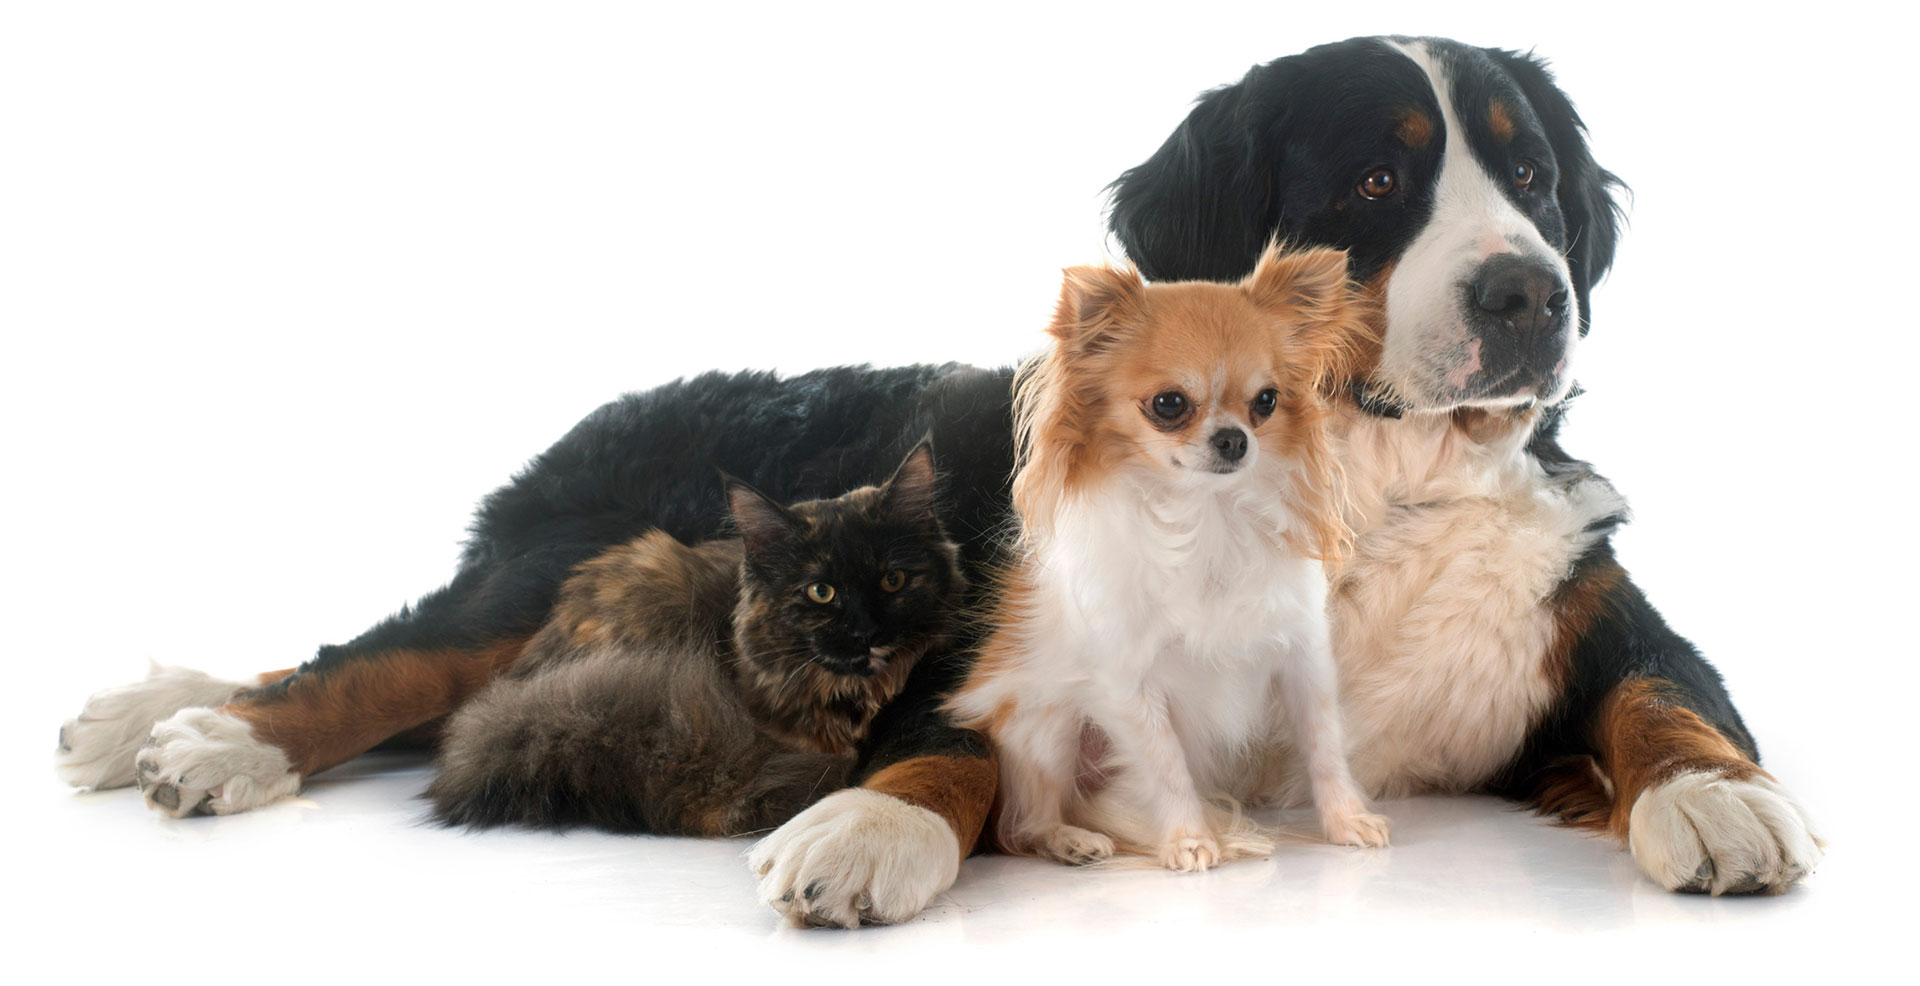 Is your pet part of your estate plan?